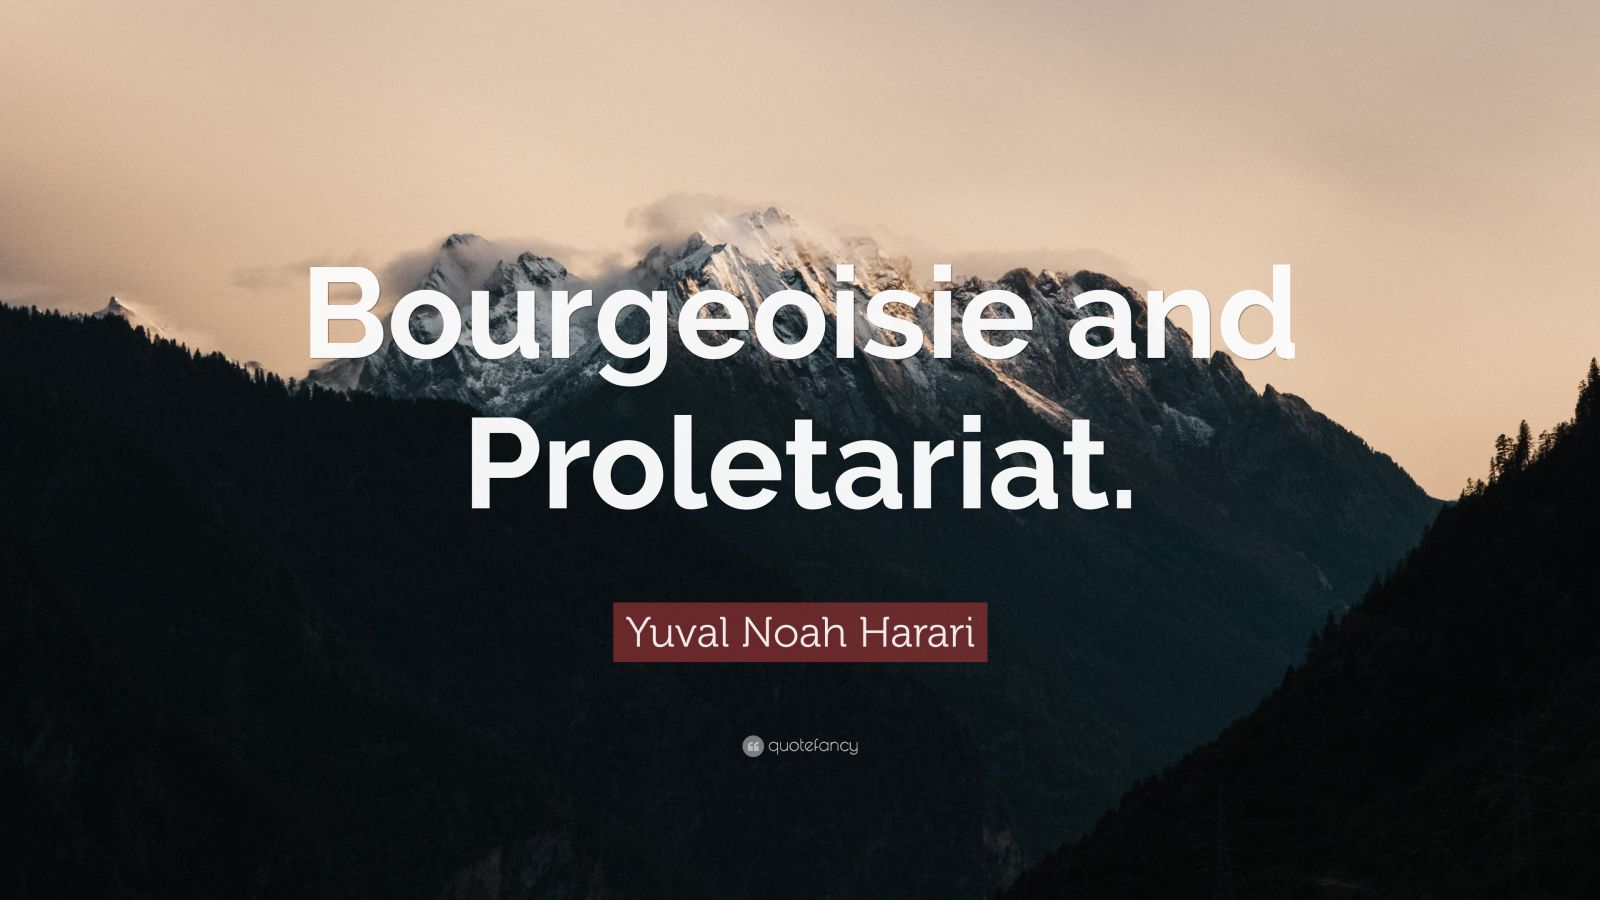 Yuval Noah Harari Quote: “Bourgeoisie and Proletariat.”